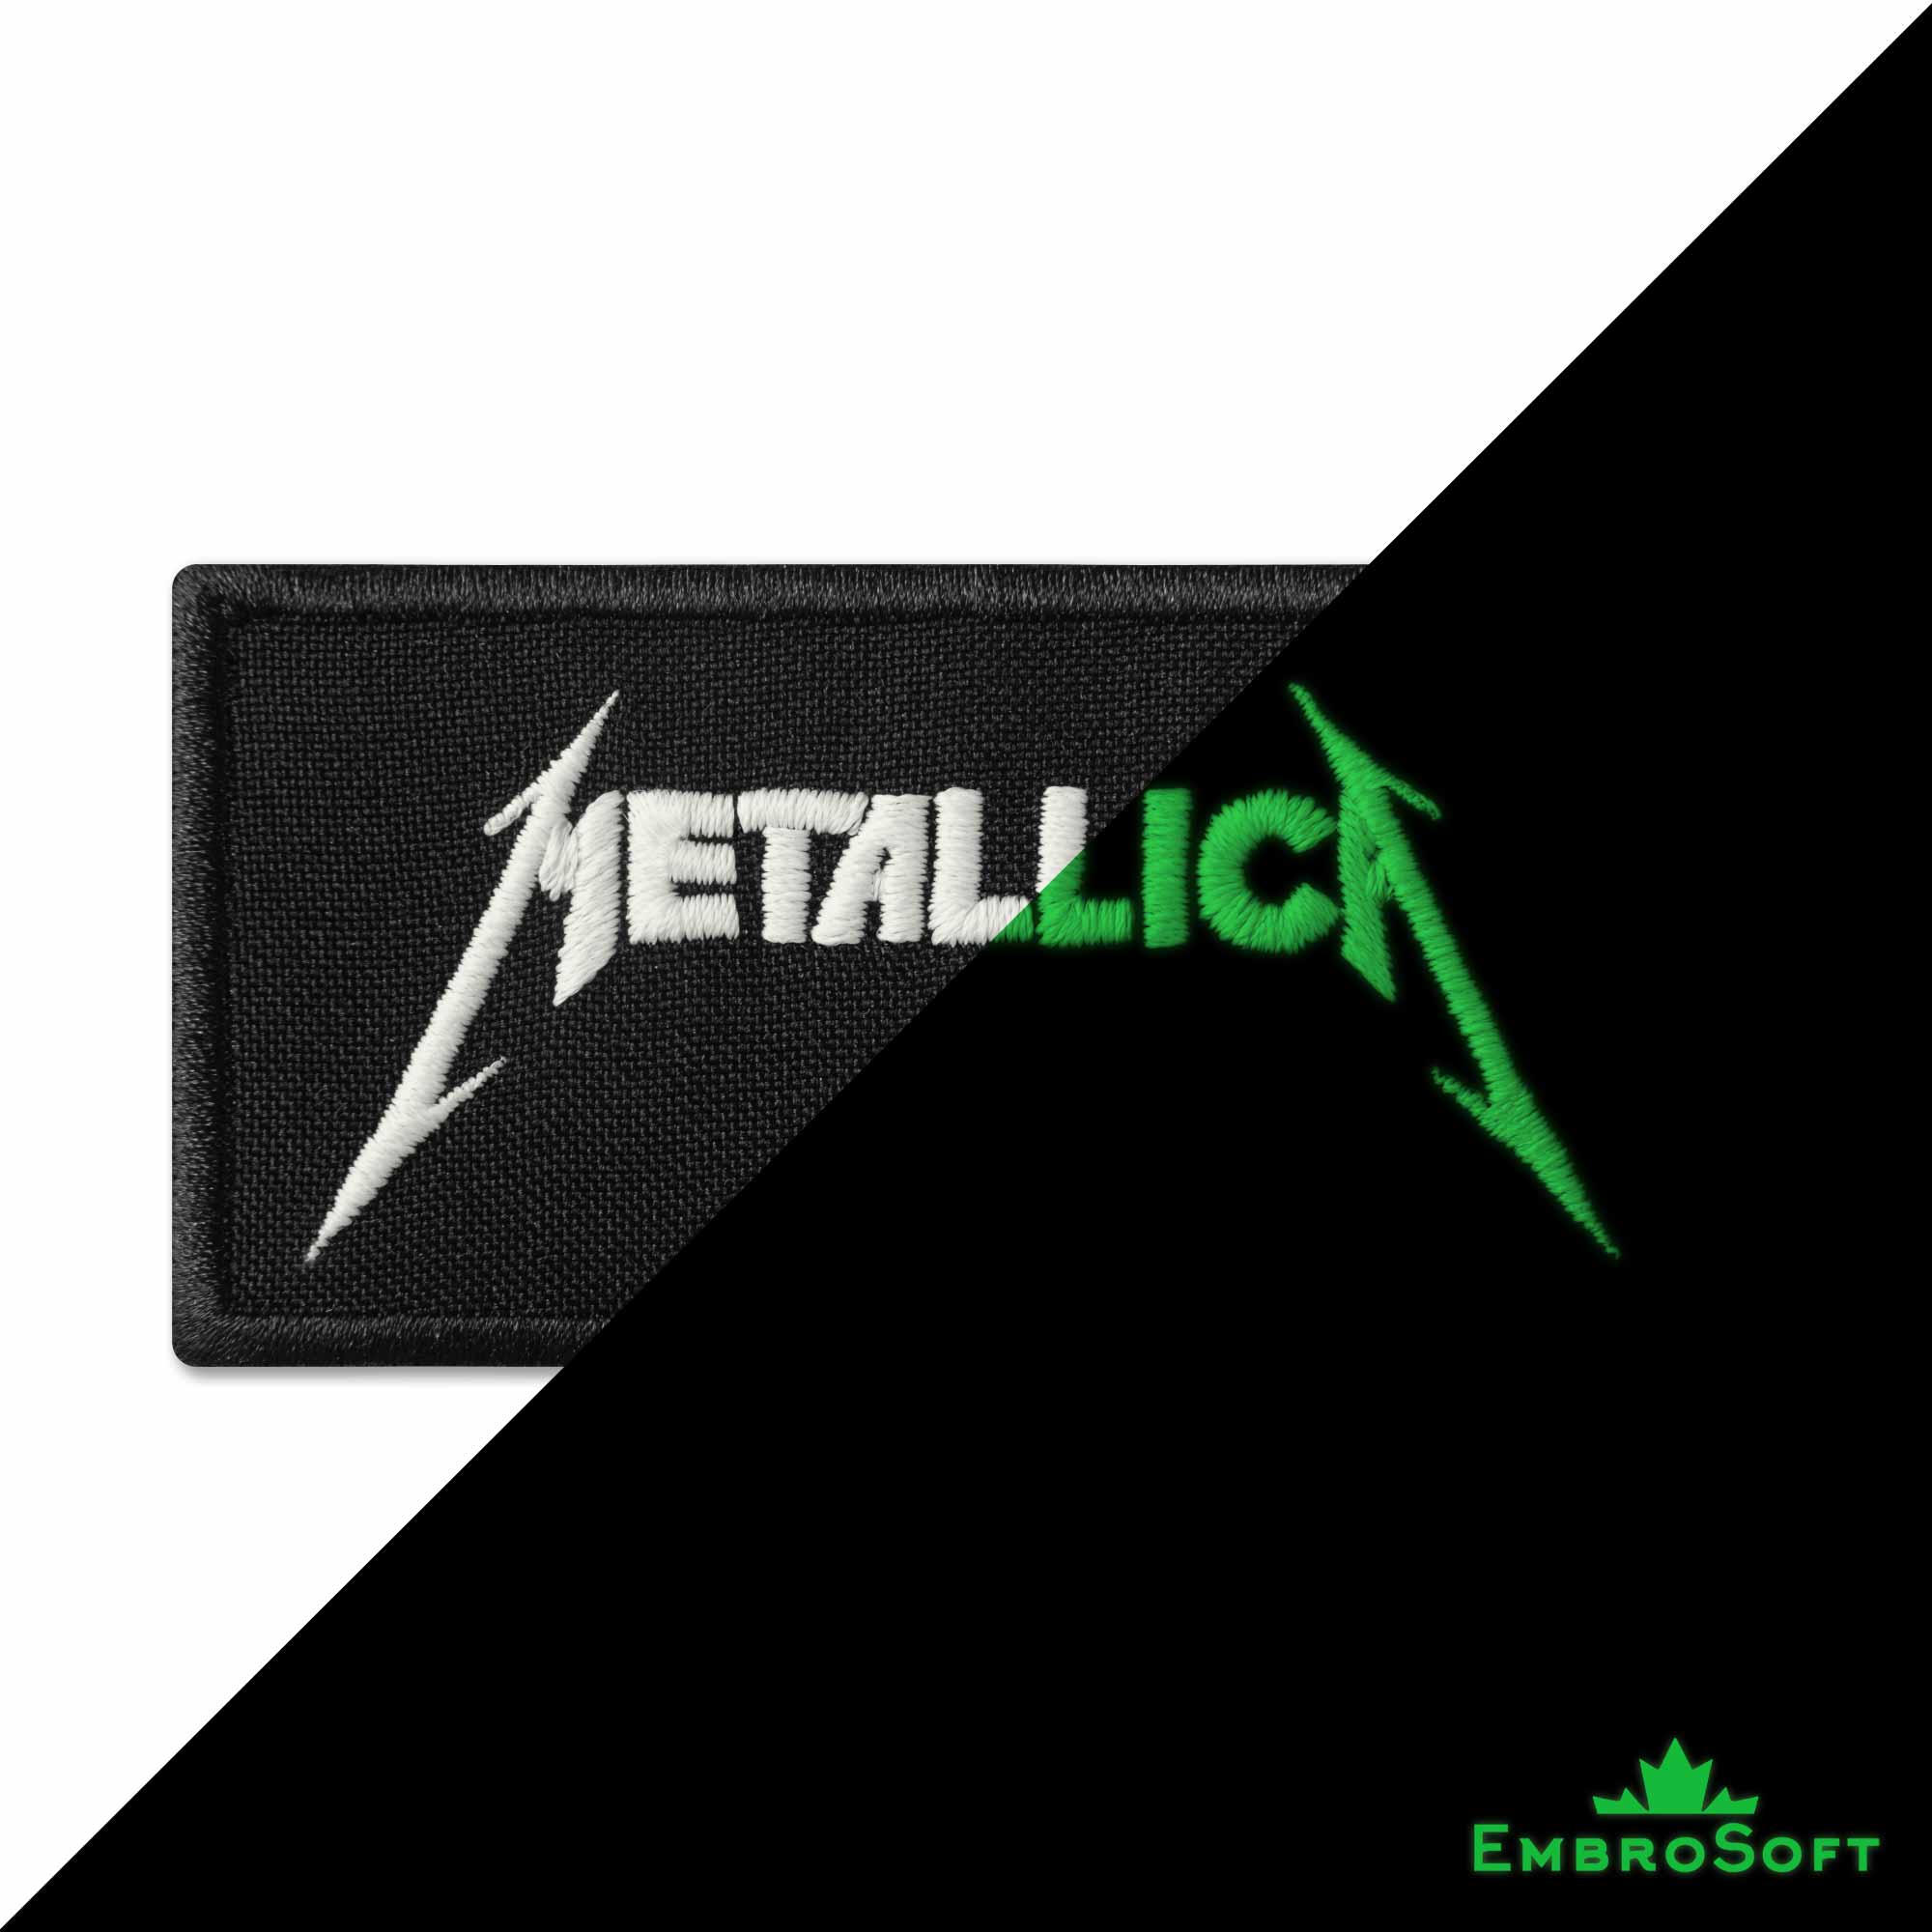 Meticalla Logo - Metallica Logo Embroidered Glowing Patch (3.3